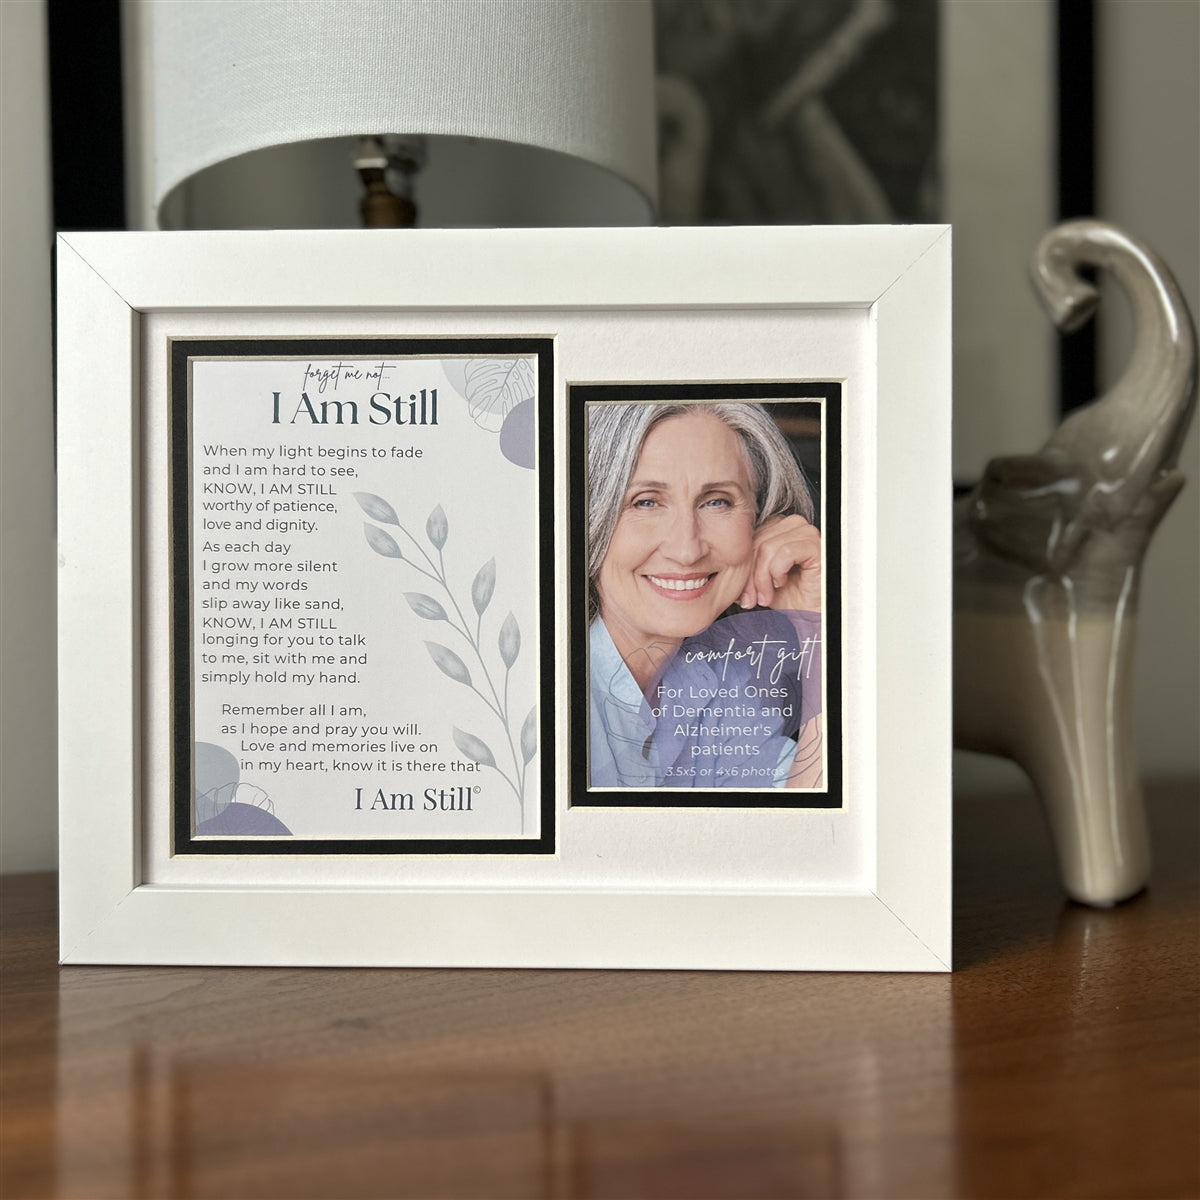 Alzheimer/Dementia Family Support Gift: 8x10 white frame with white and black double mat, includes "I am Still" poem and space for photo